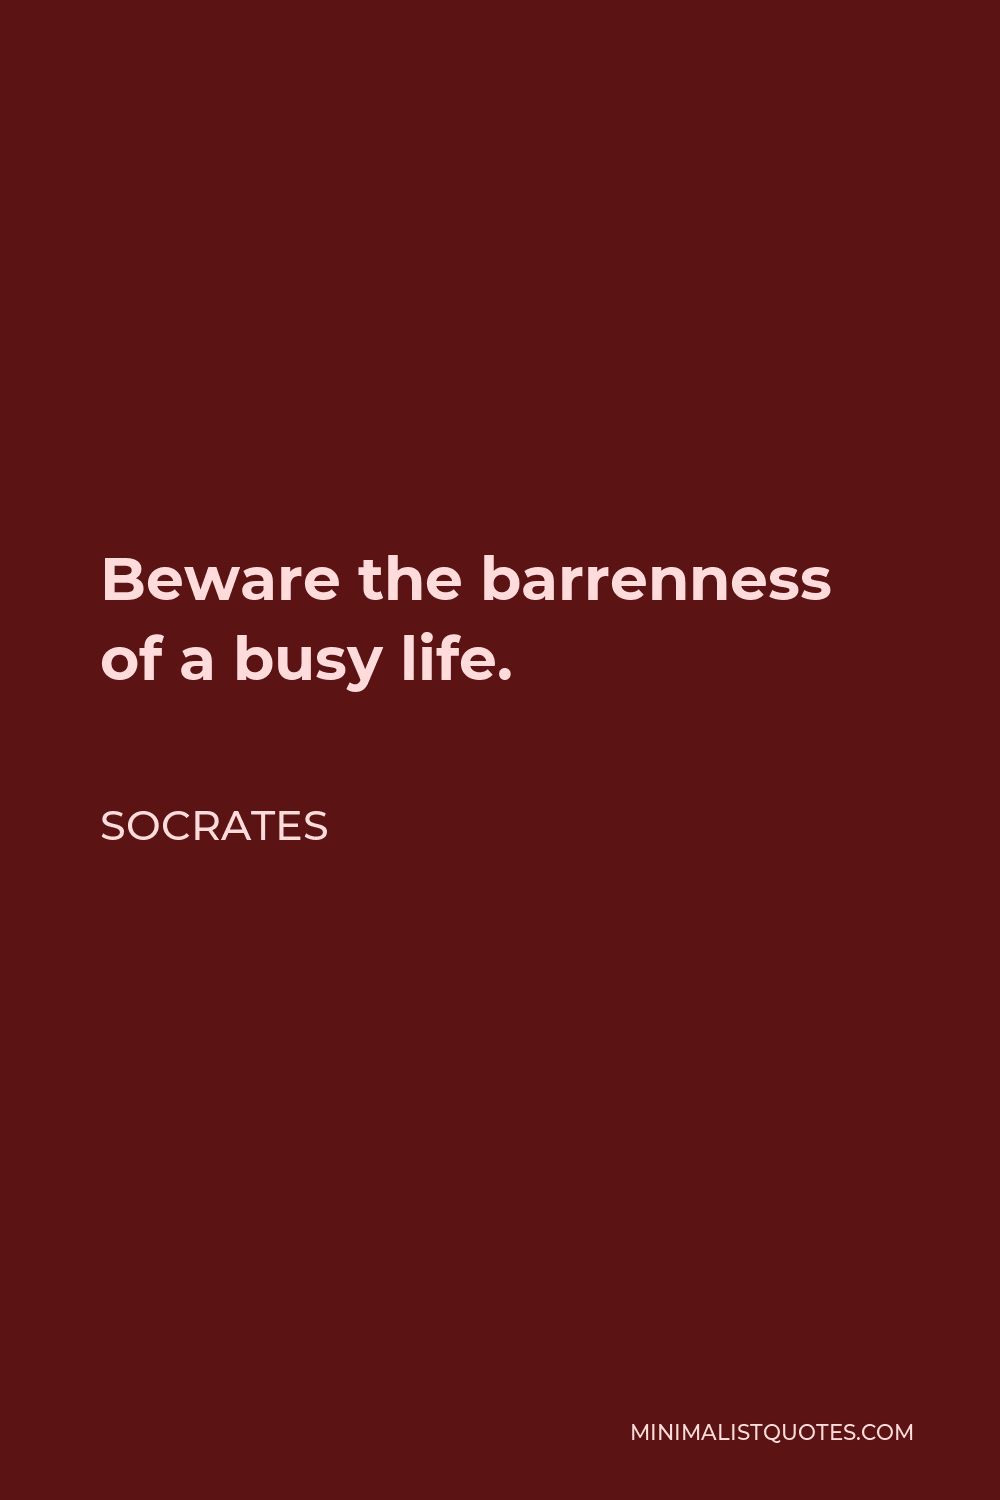 Socrates Quote - Beware the barrenness of a busy life.